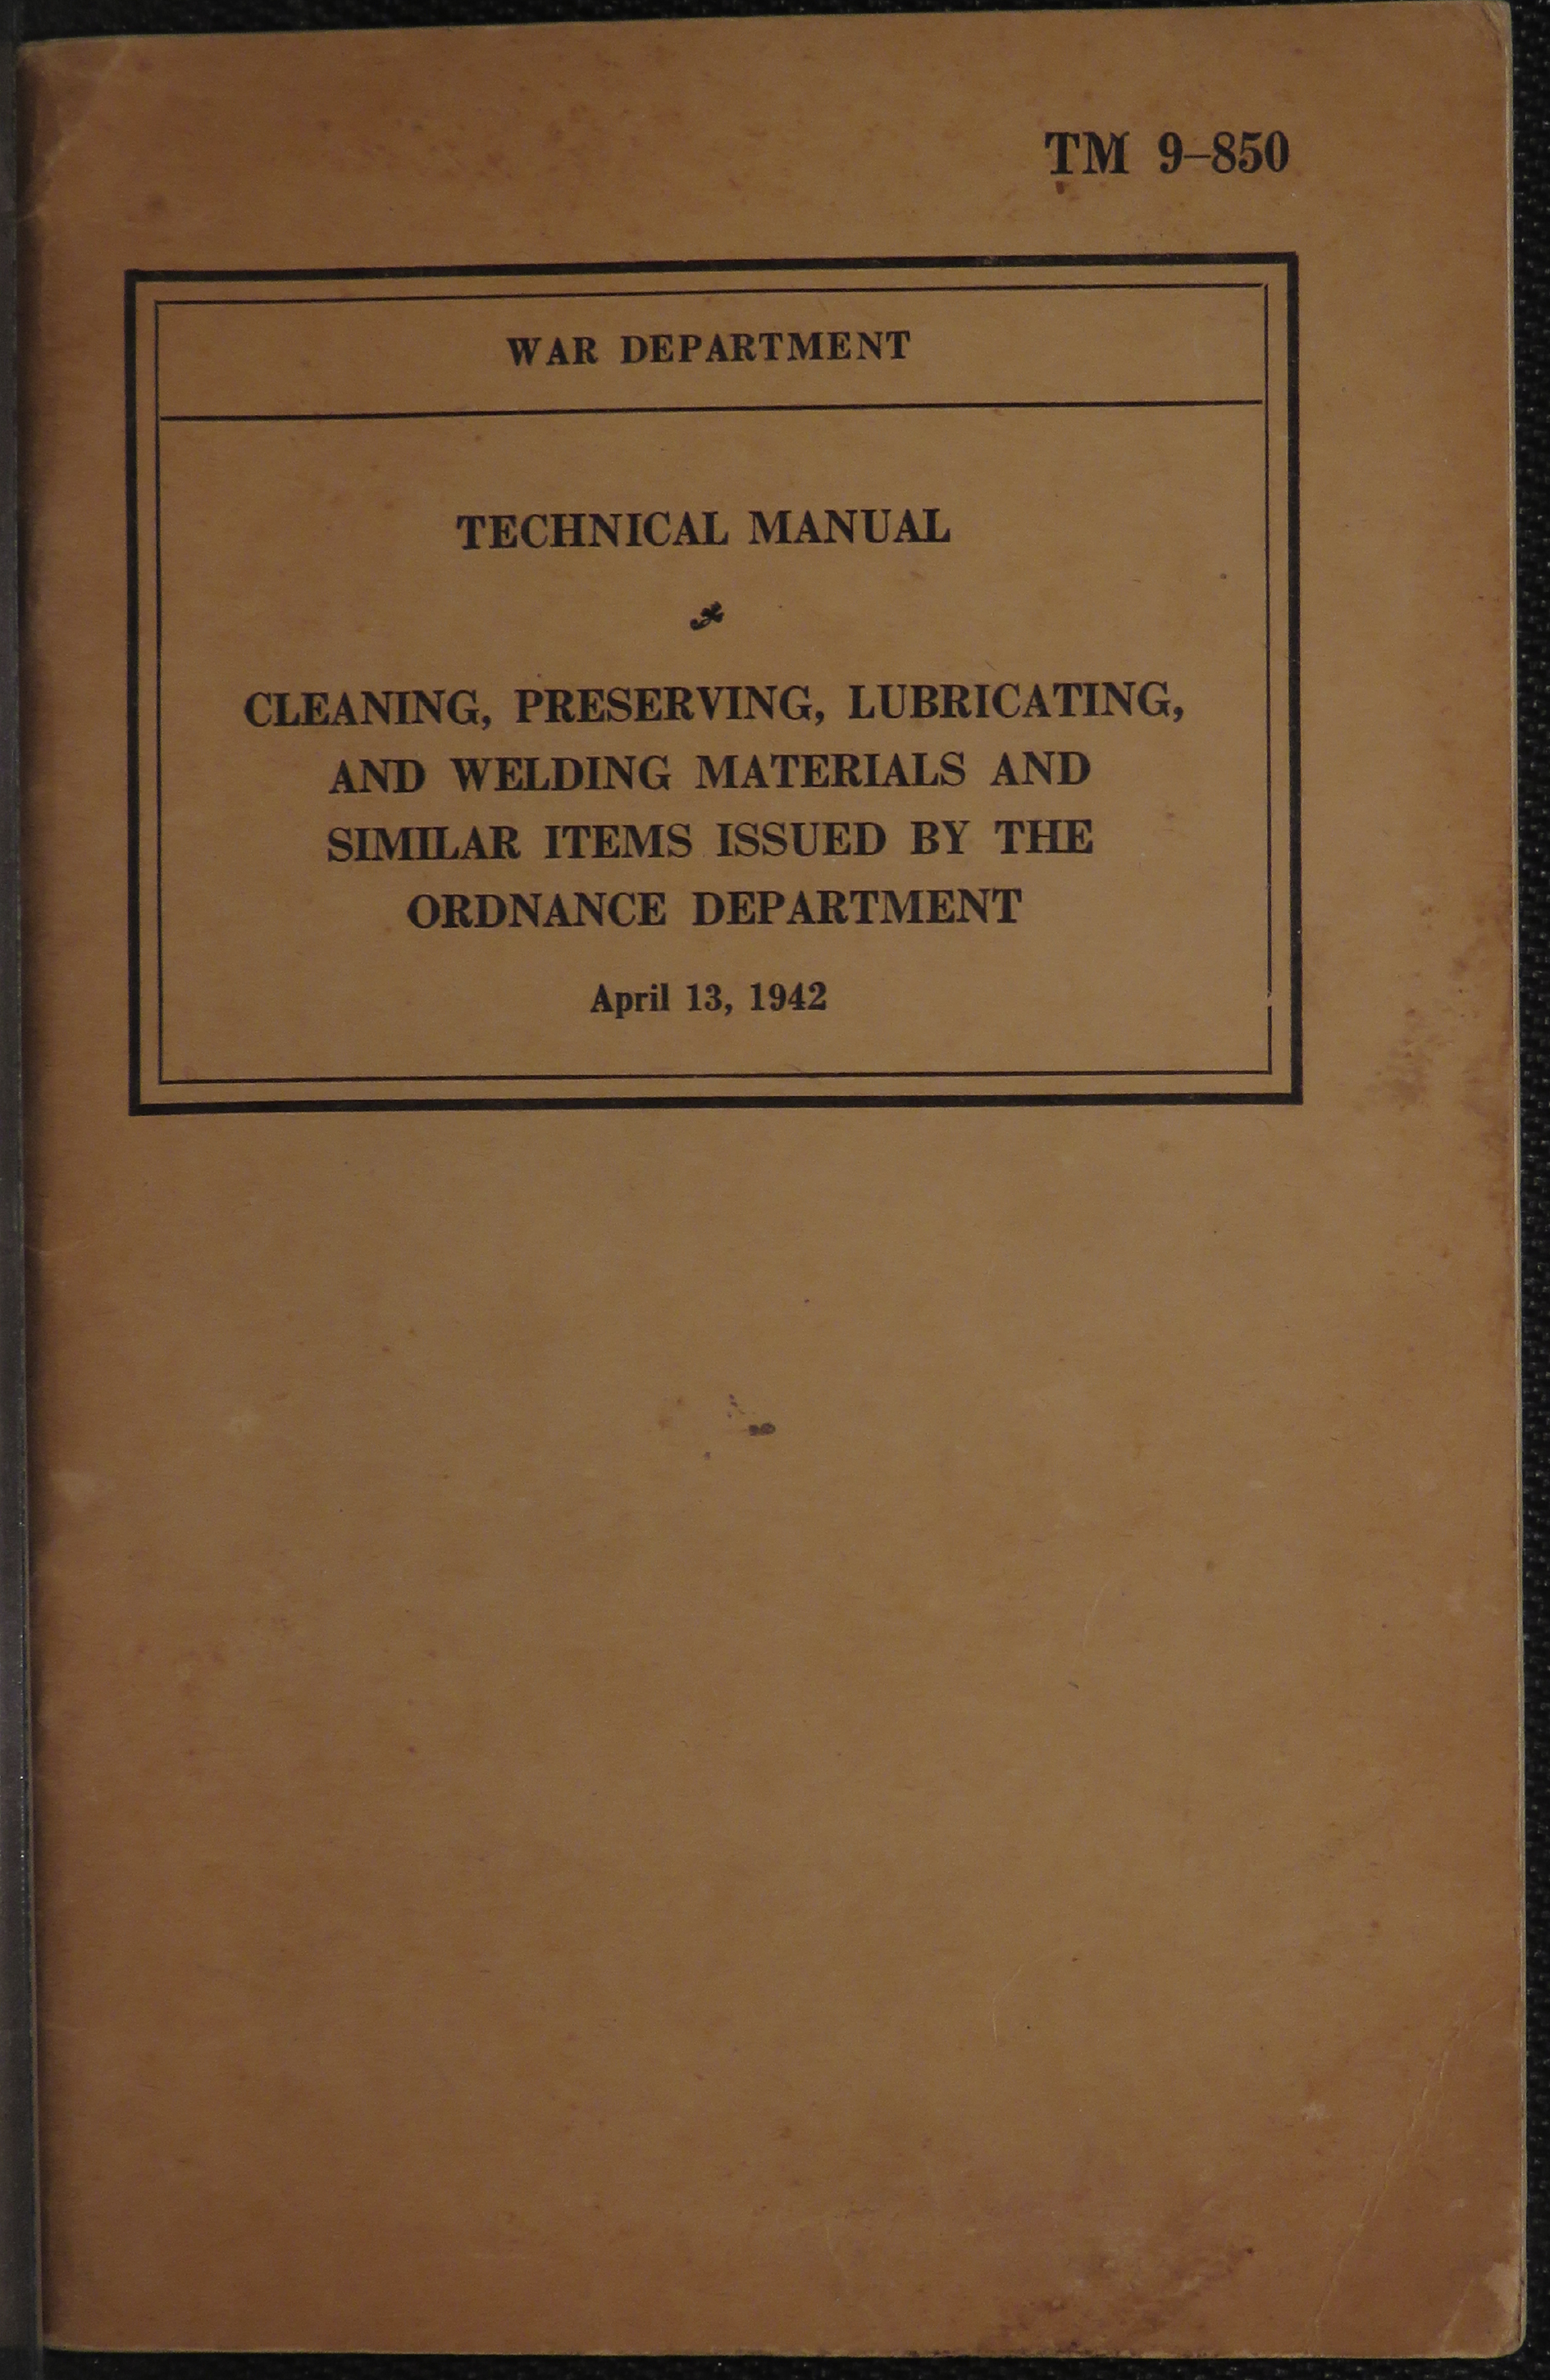 Sample page 1 from AirCorps Library document: Cleaning, Preserving, Lubricating, Welding Materials, and Similar Items Issued by the Ordinance Department